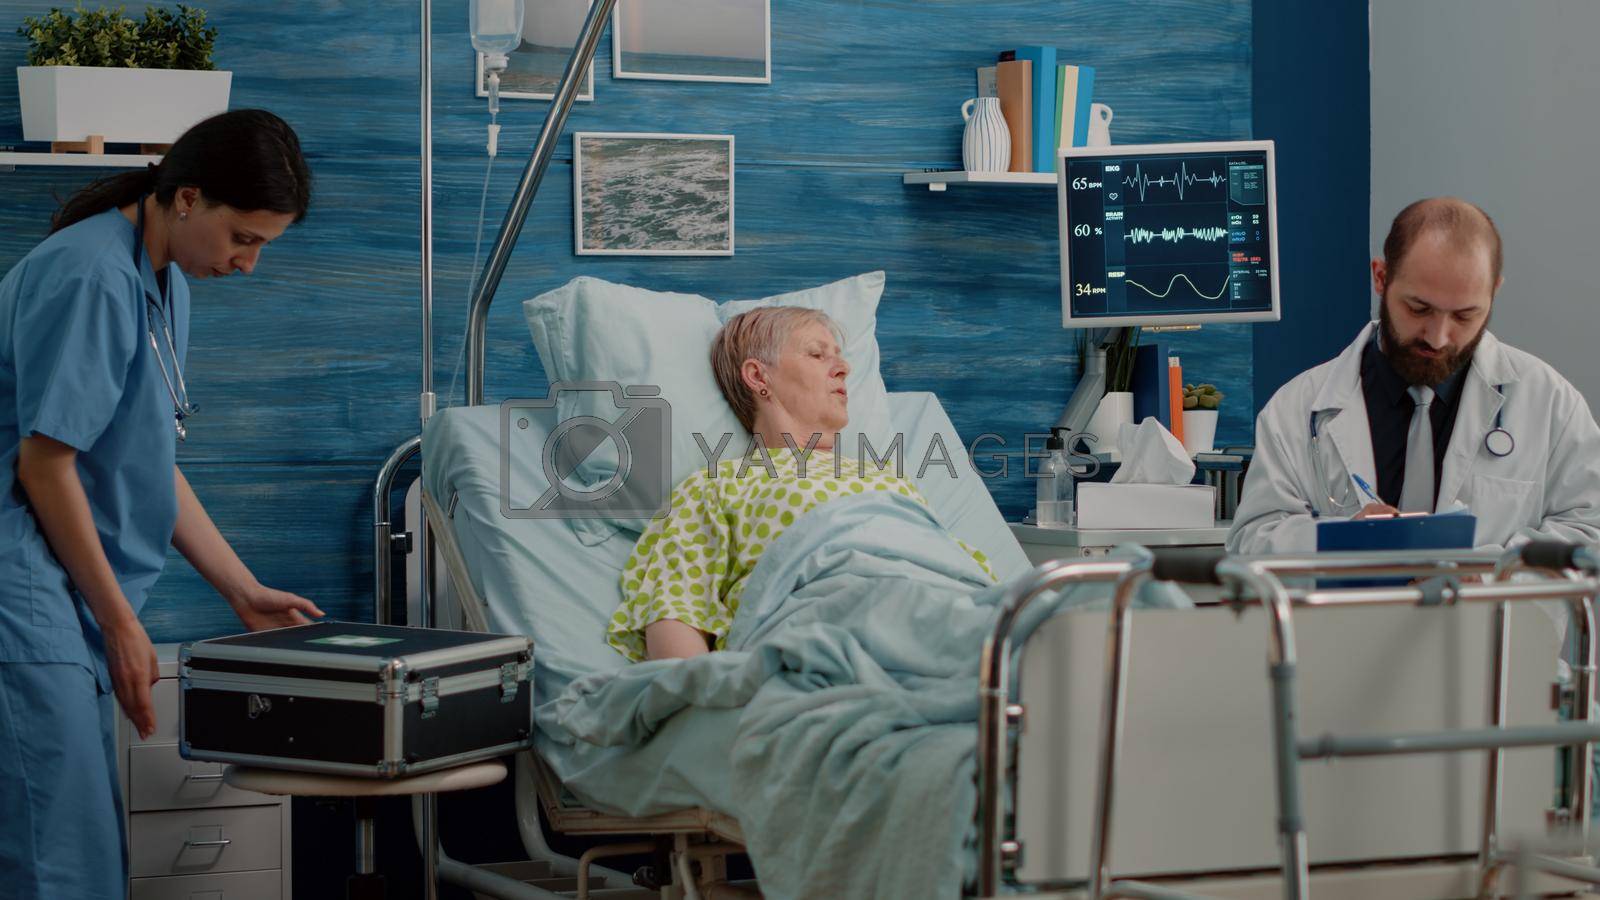 Doctor and nurse doing healthcare checkup with retired woman in bed. Medical team consulting elder patient with sickness, using equipment and heart rate monitor. Person at examination